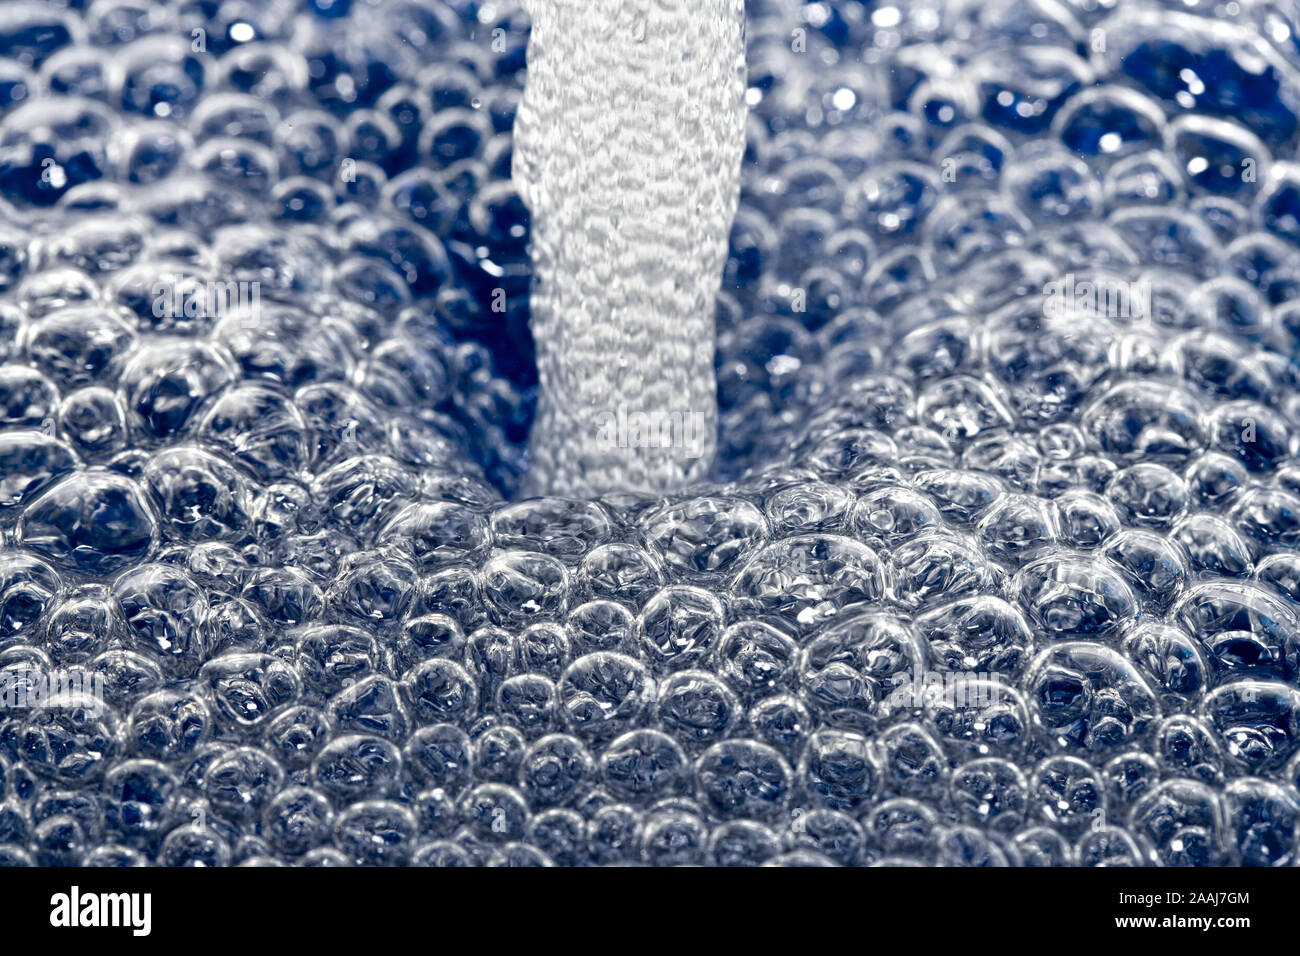 A jet of water generating bubbles Stock Photo